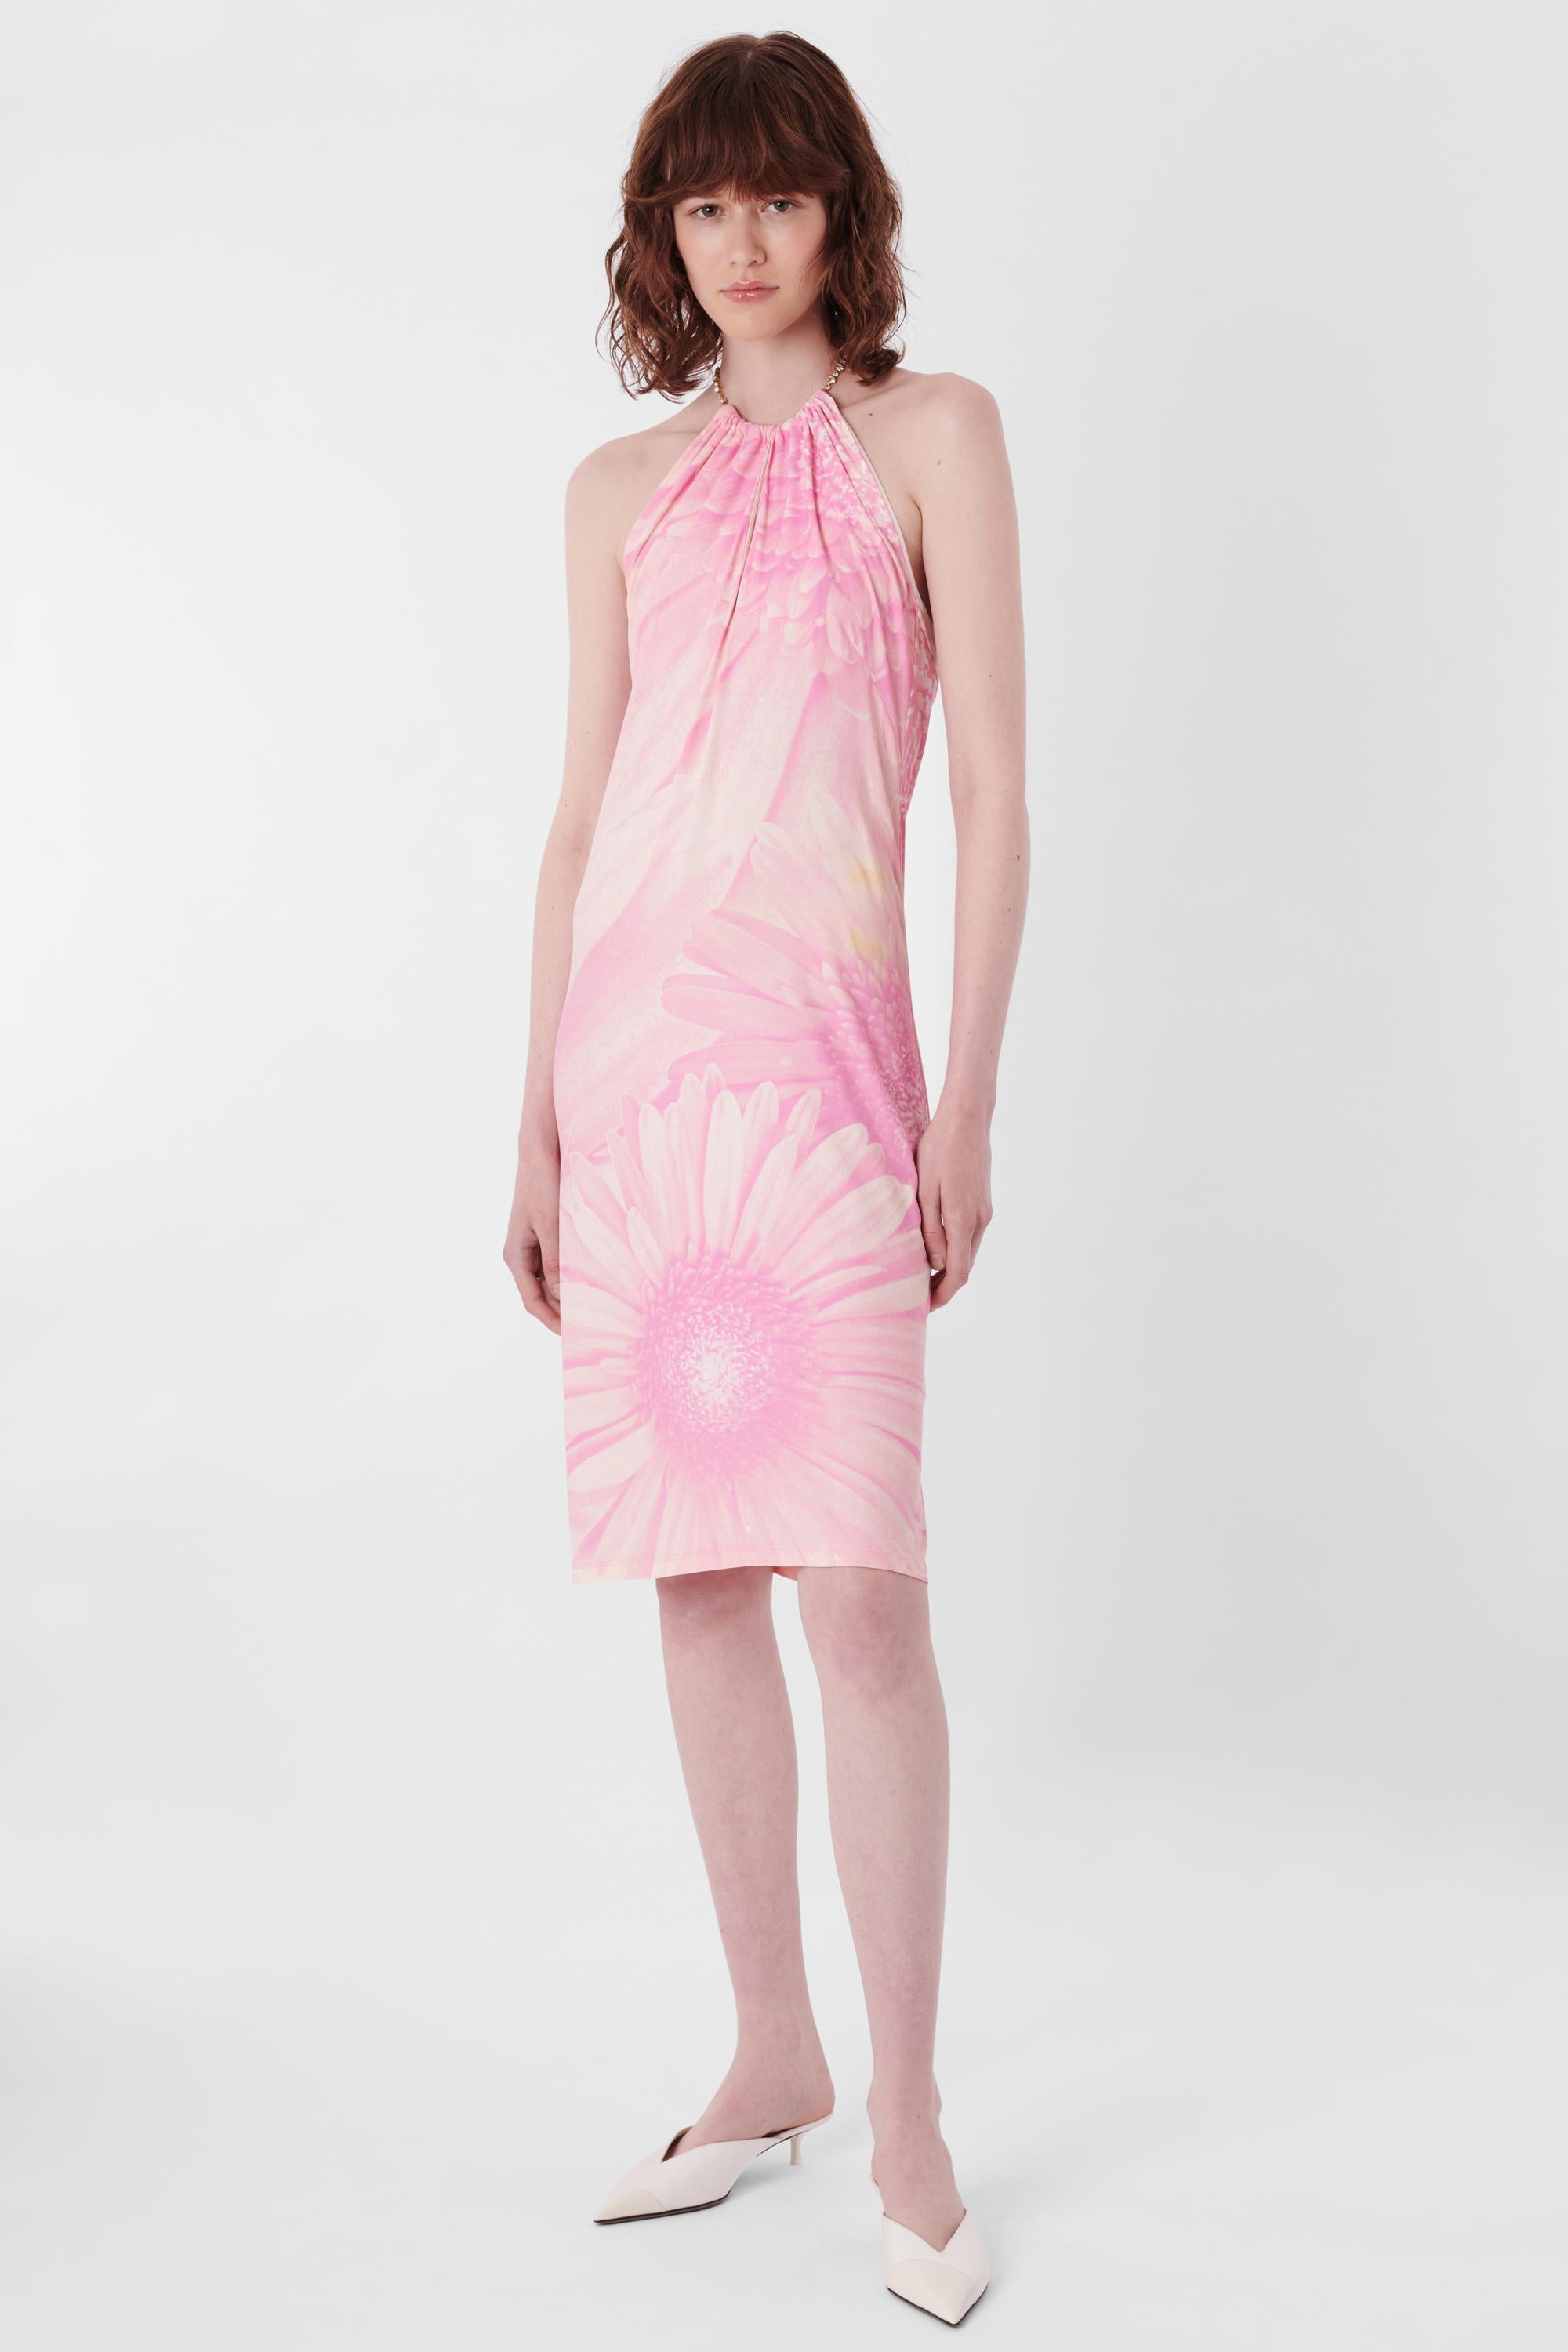 Roberto Cavalli S/S 2000's halter neck pink flower print dress. Features crystal diamante neck fastening, Key hole neckline, slim fit and knee length. In excellent vintage condition.

Label Size: Small
Modern size: UK: 8 to 10, US: 2 to 4, EU: 36 to